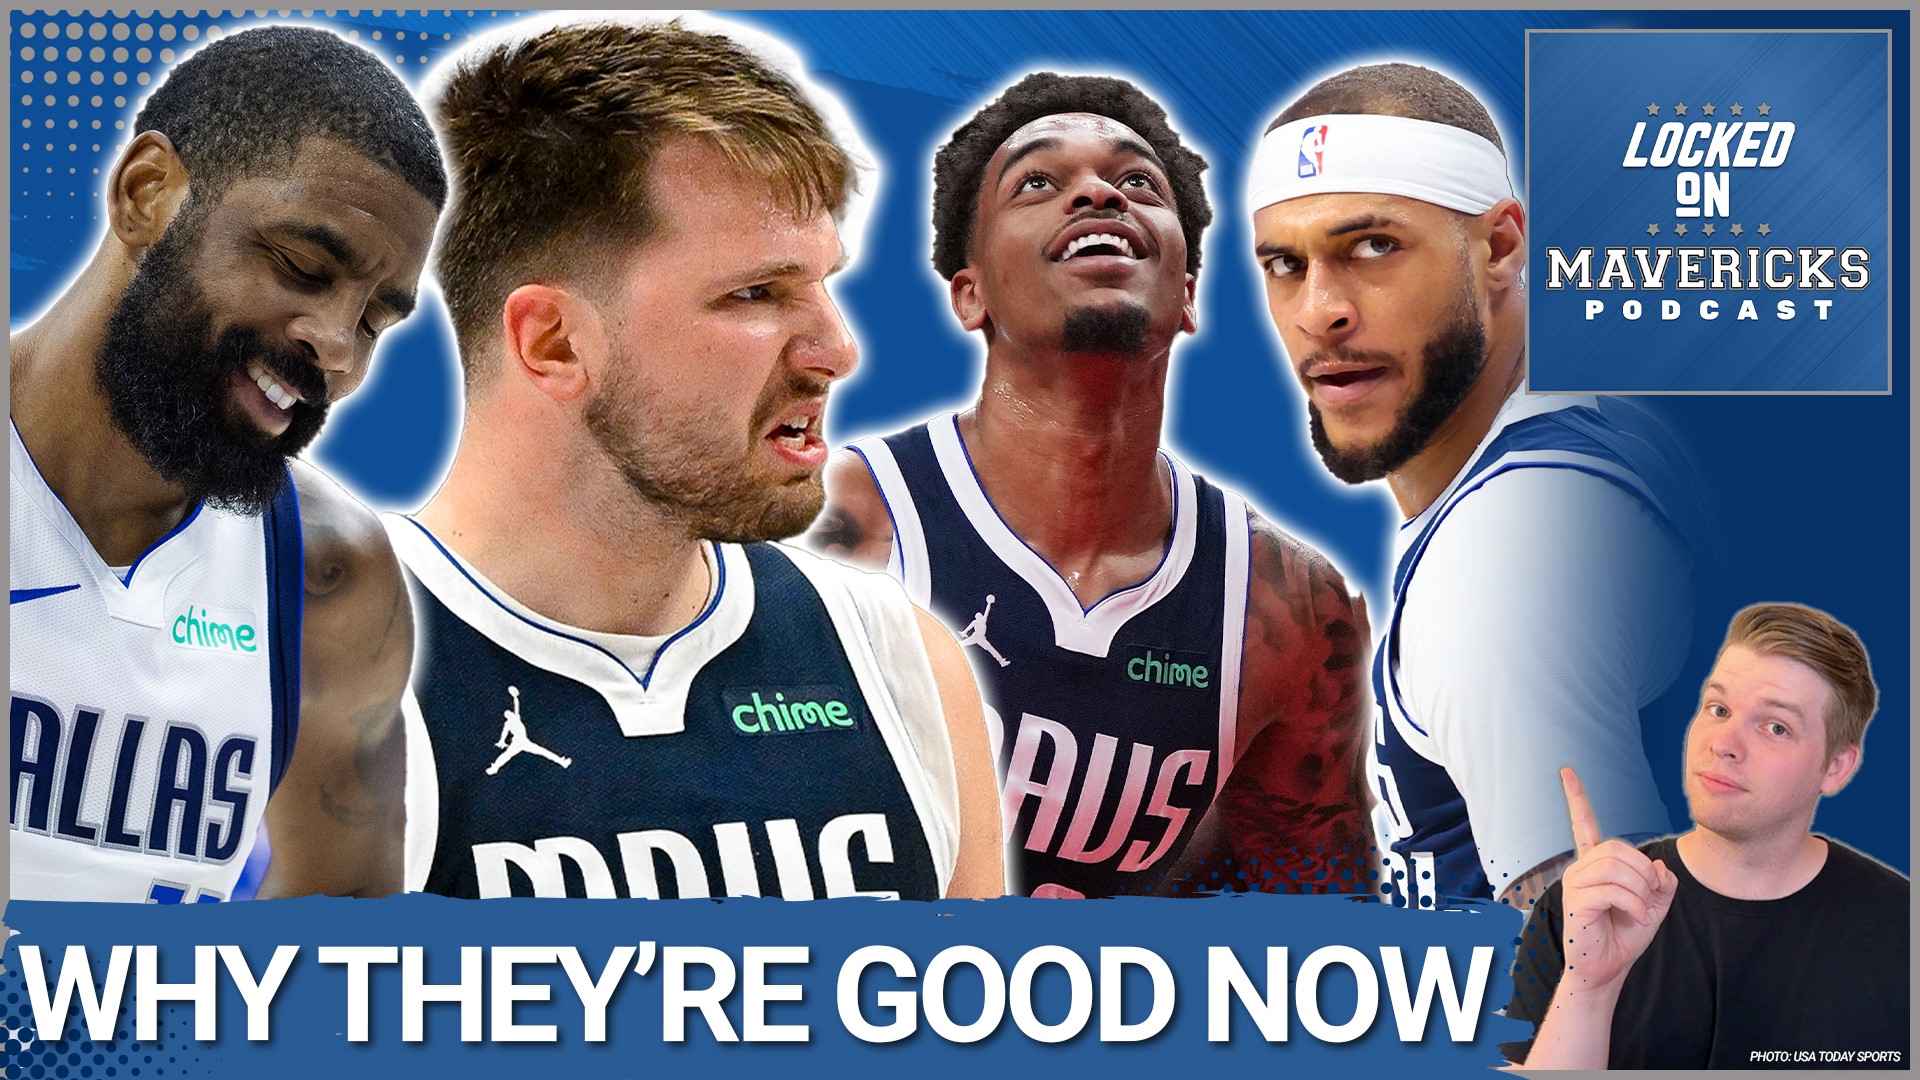 Nick Angstadt explains why the Dallas Mavericks seem to be everyone’s pick to make a run in the NBA Playoffs behind Luka Doncic, Kyrie Irving, and defense.